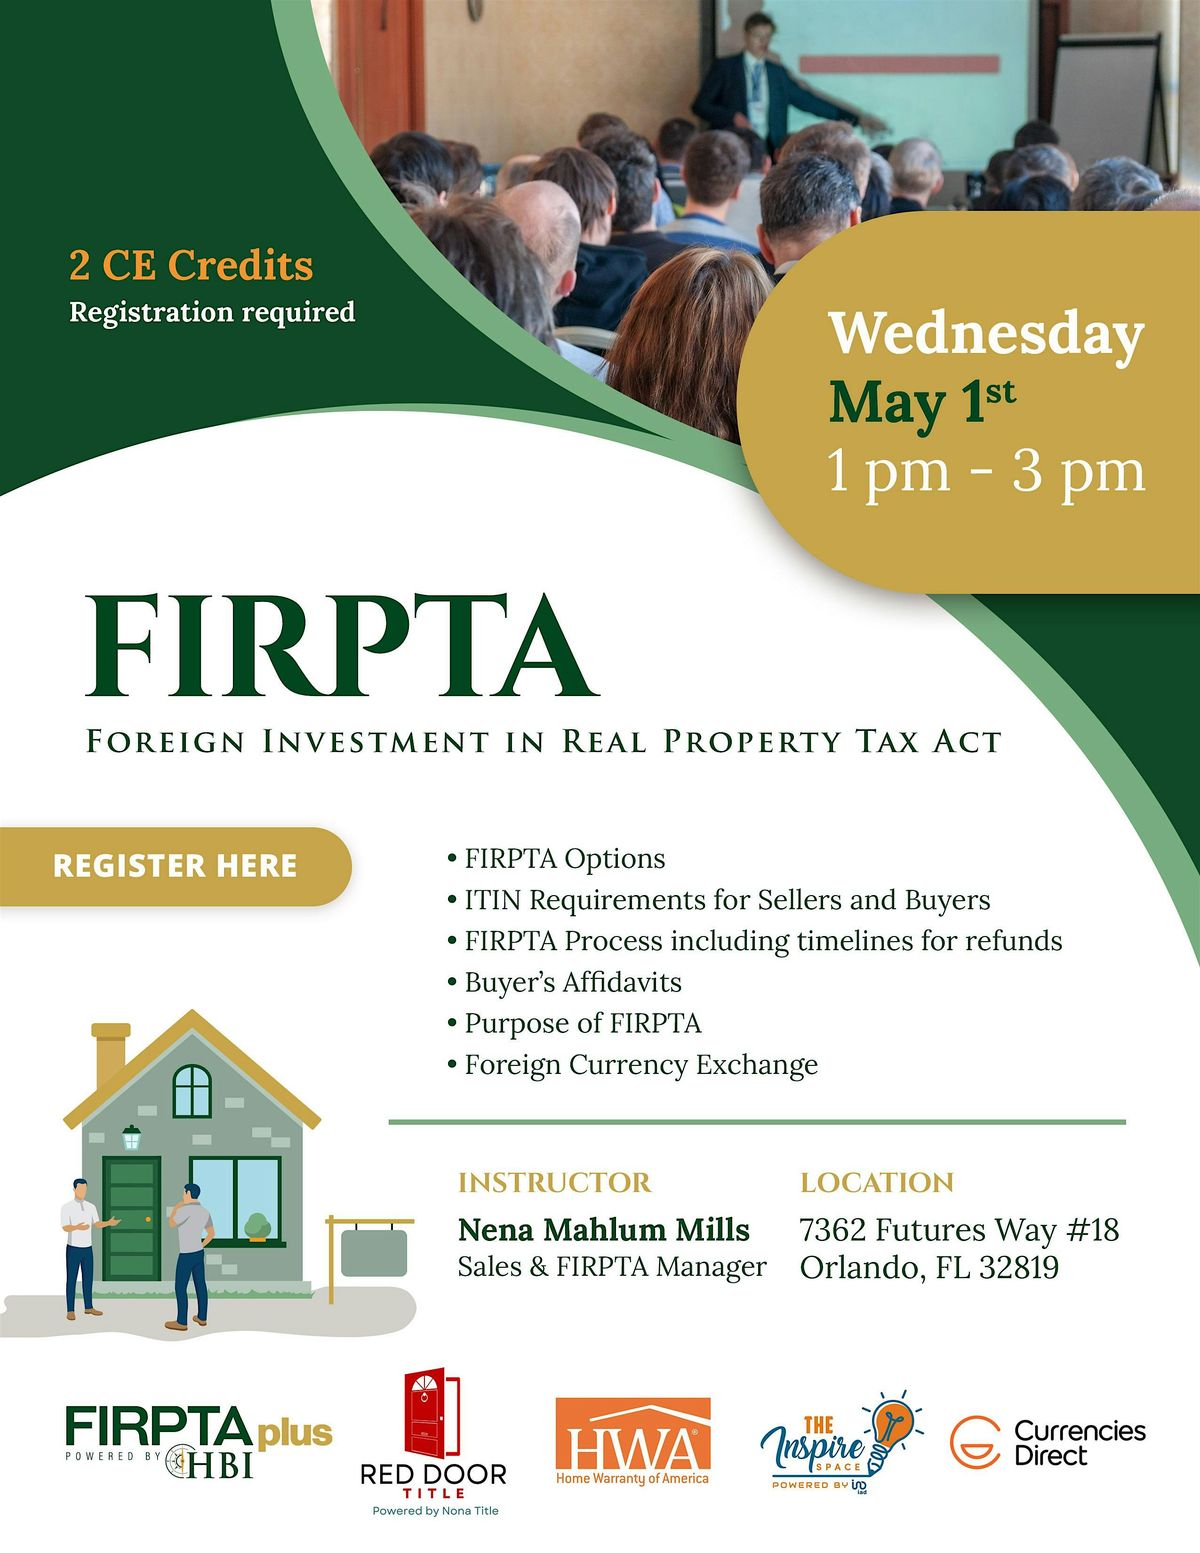 FACTS ABOUT FIRPTA - Foreign Investment In Real Property Tax Act